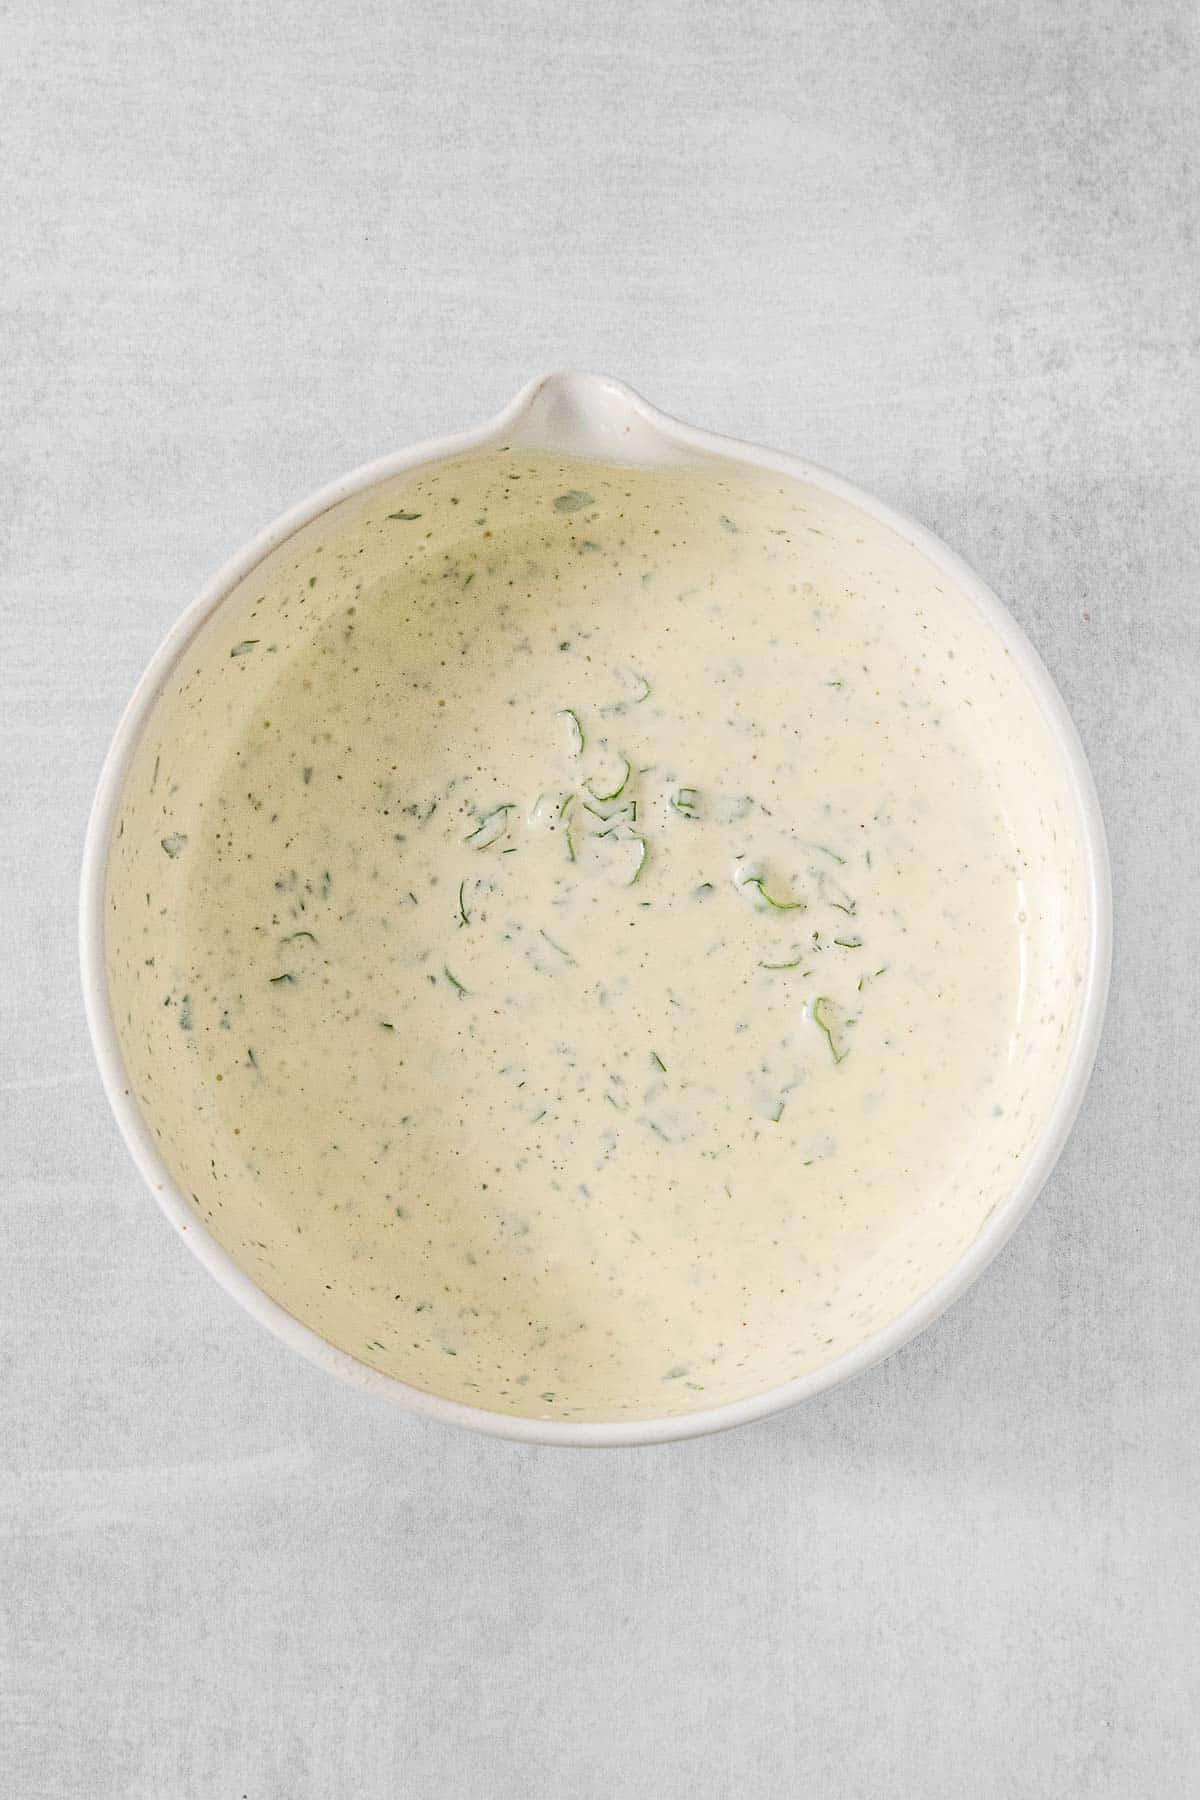 Salad dressing in a white mixing bowl.